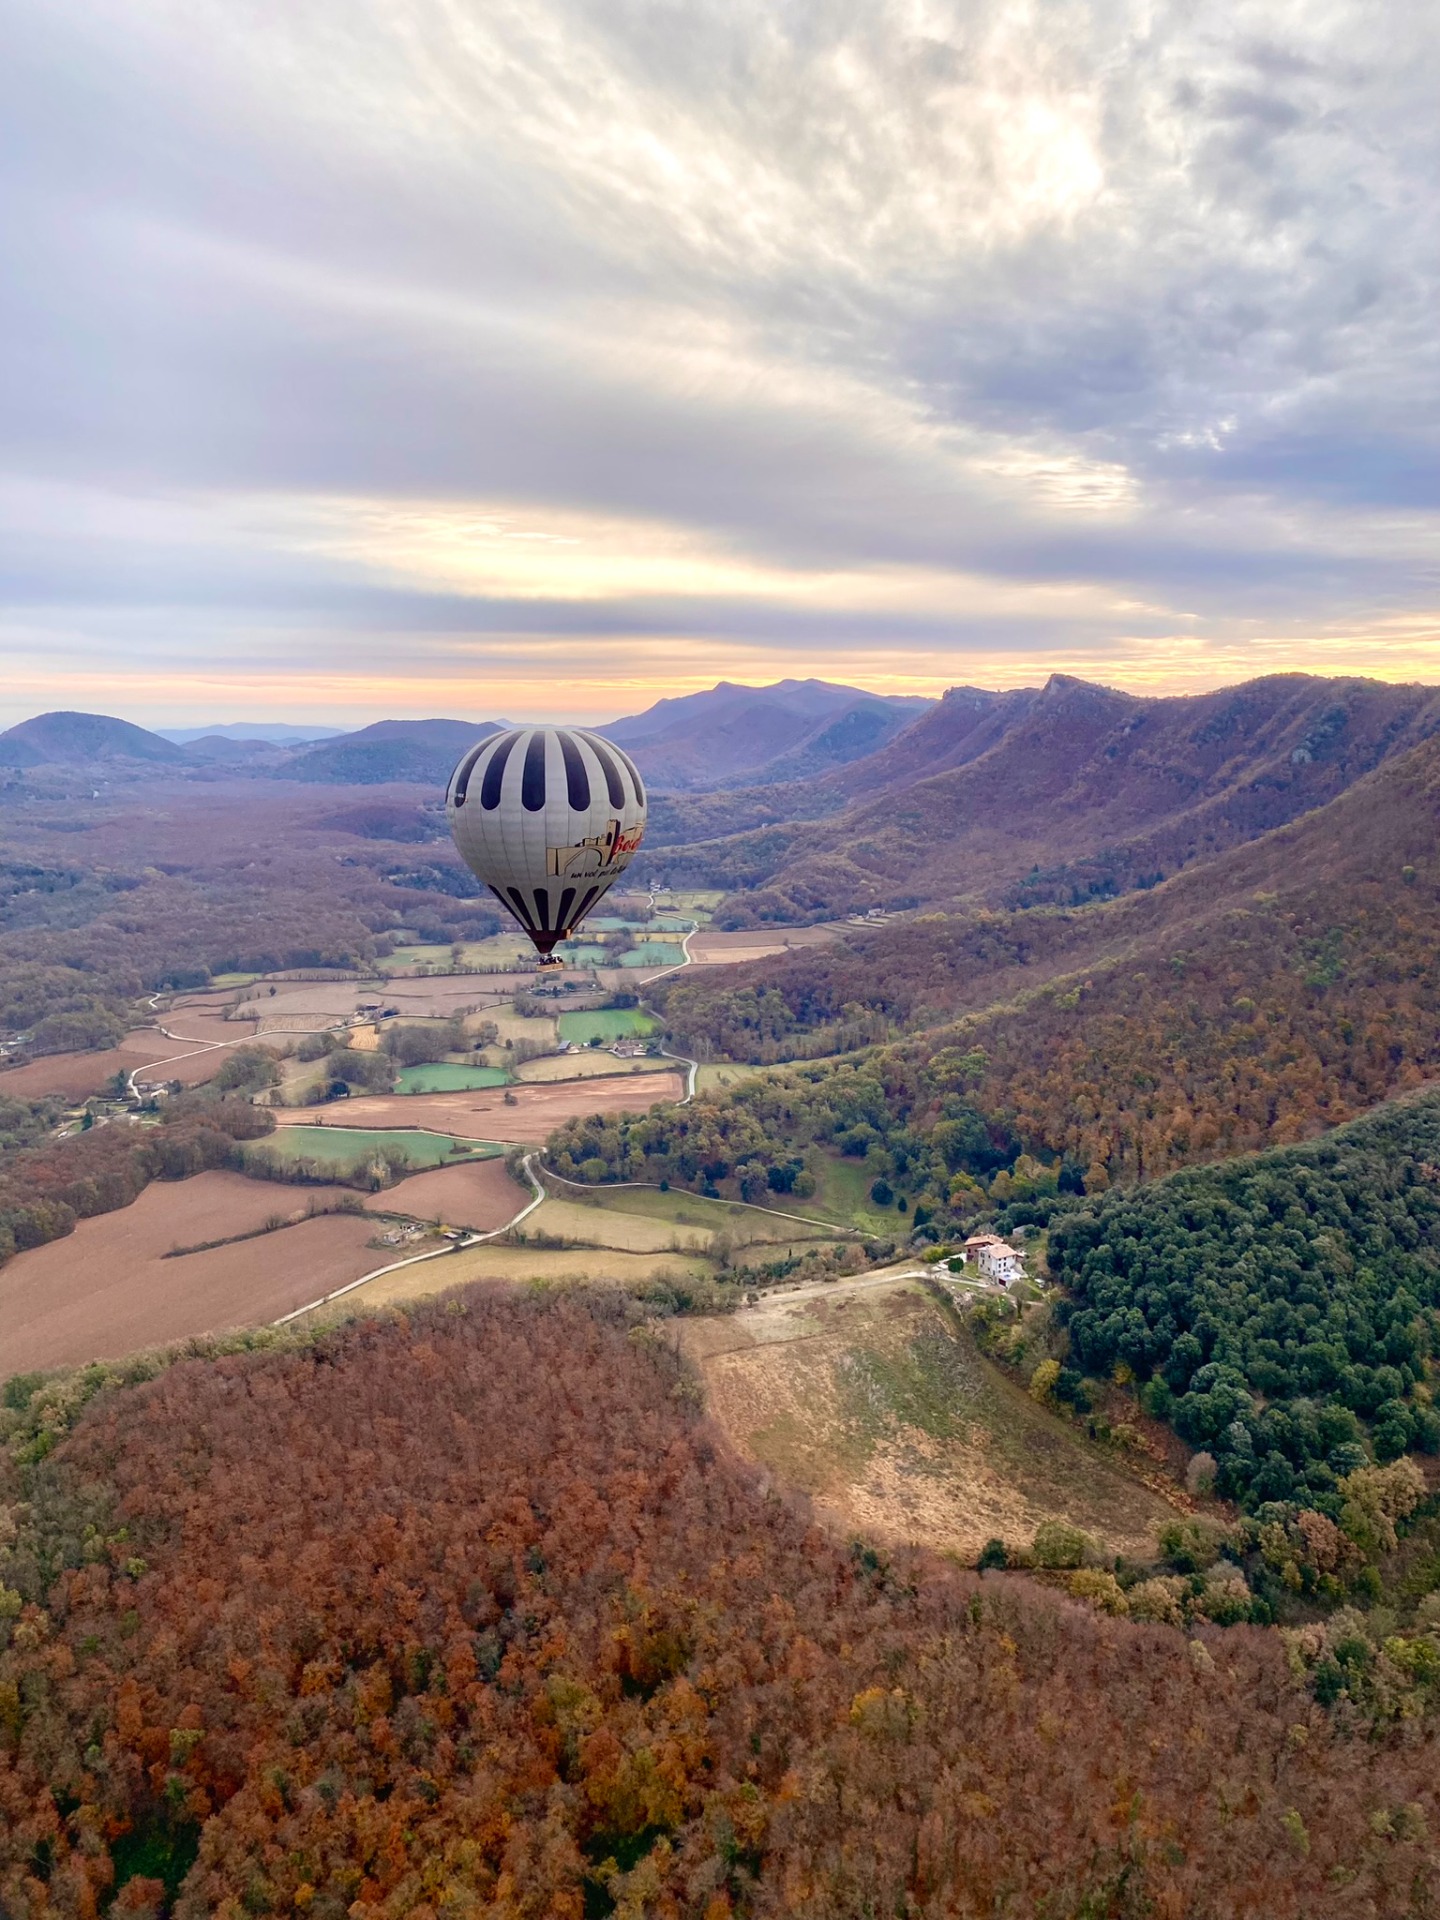  Balloon in the sky with forest and mountain scenery